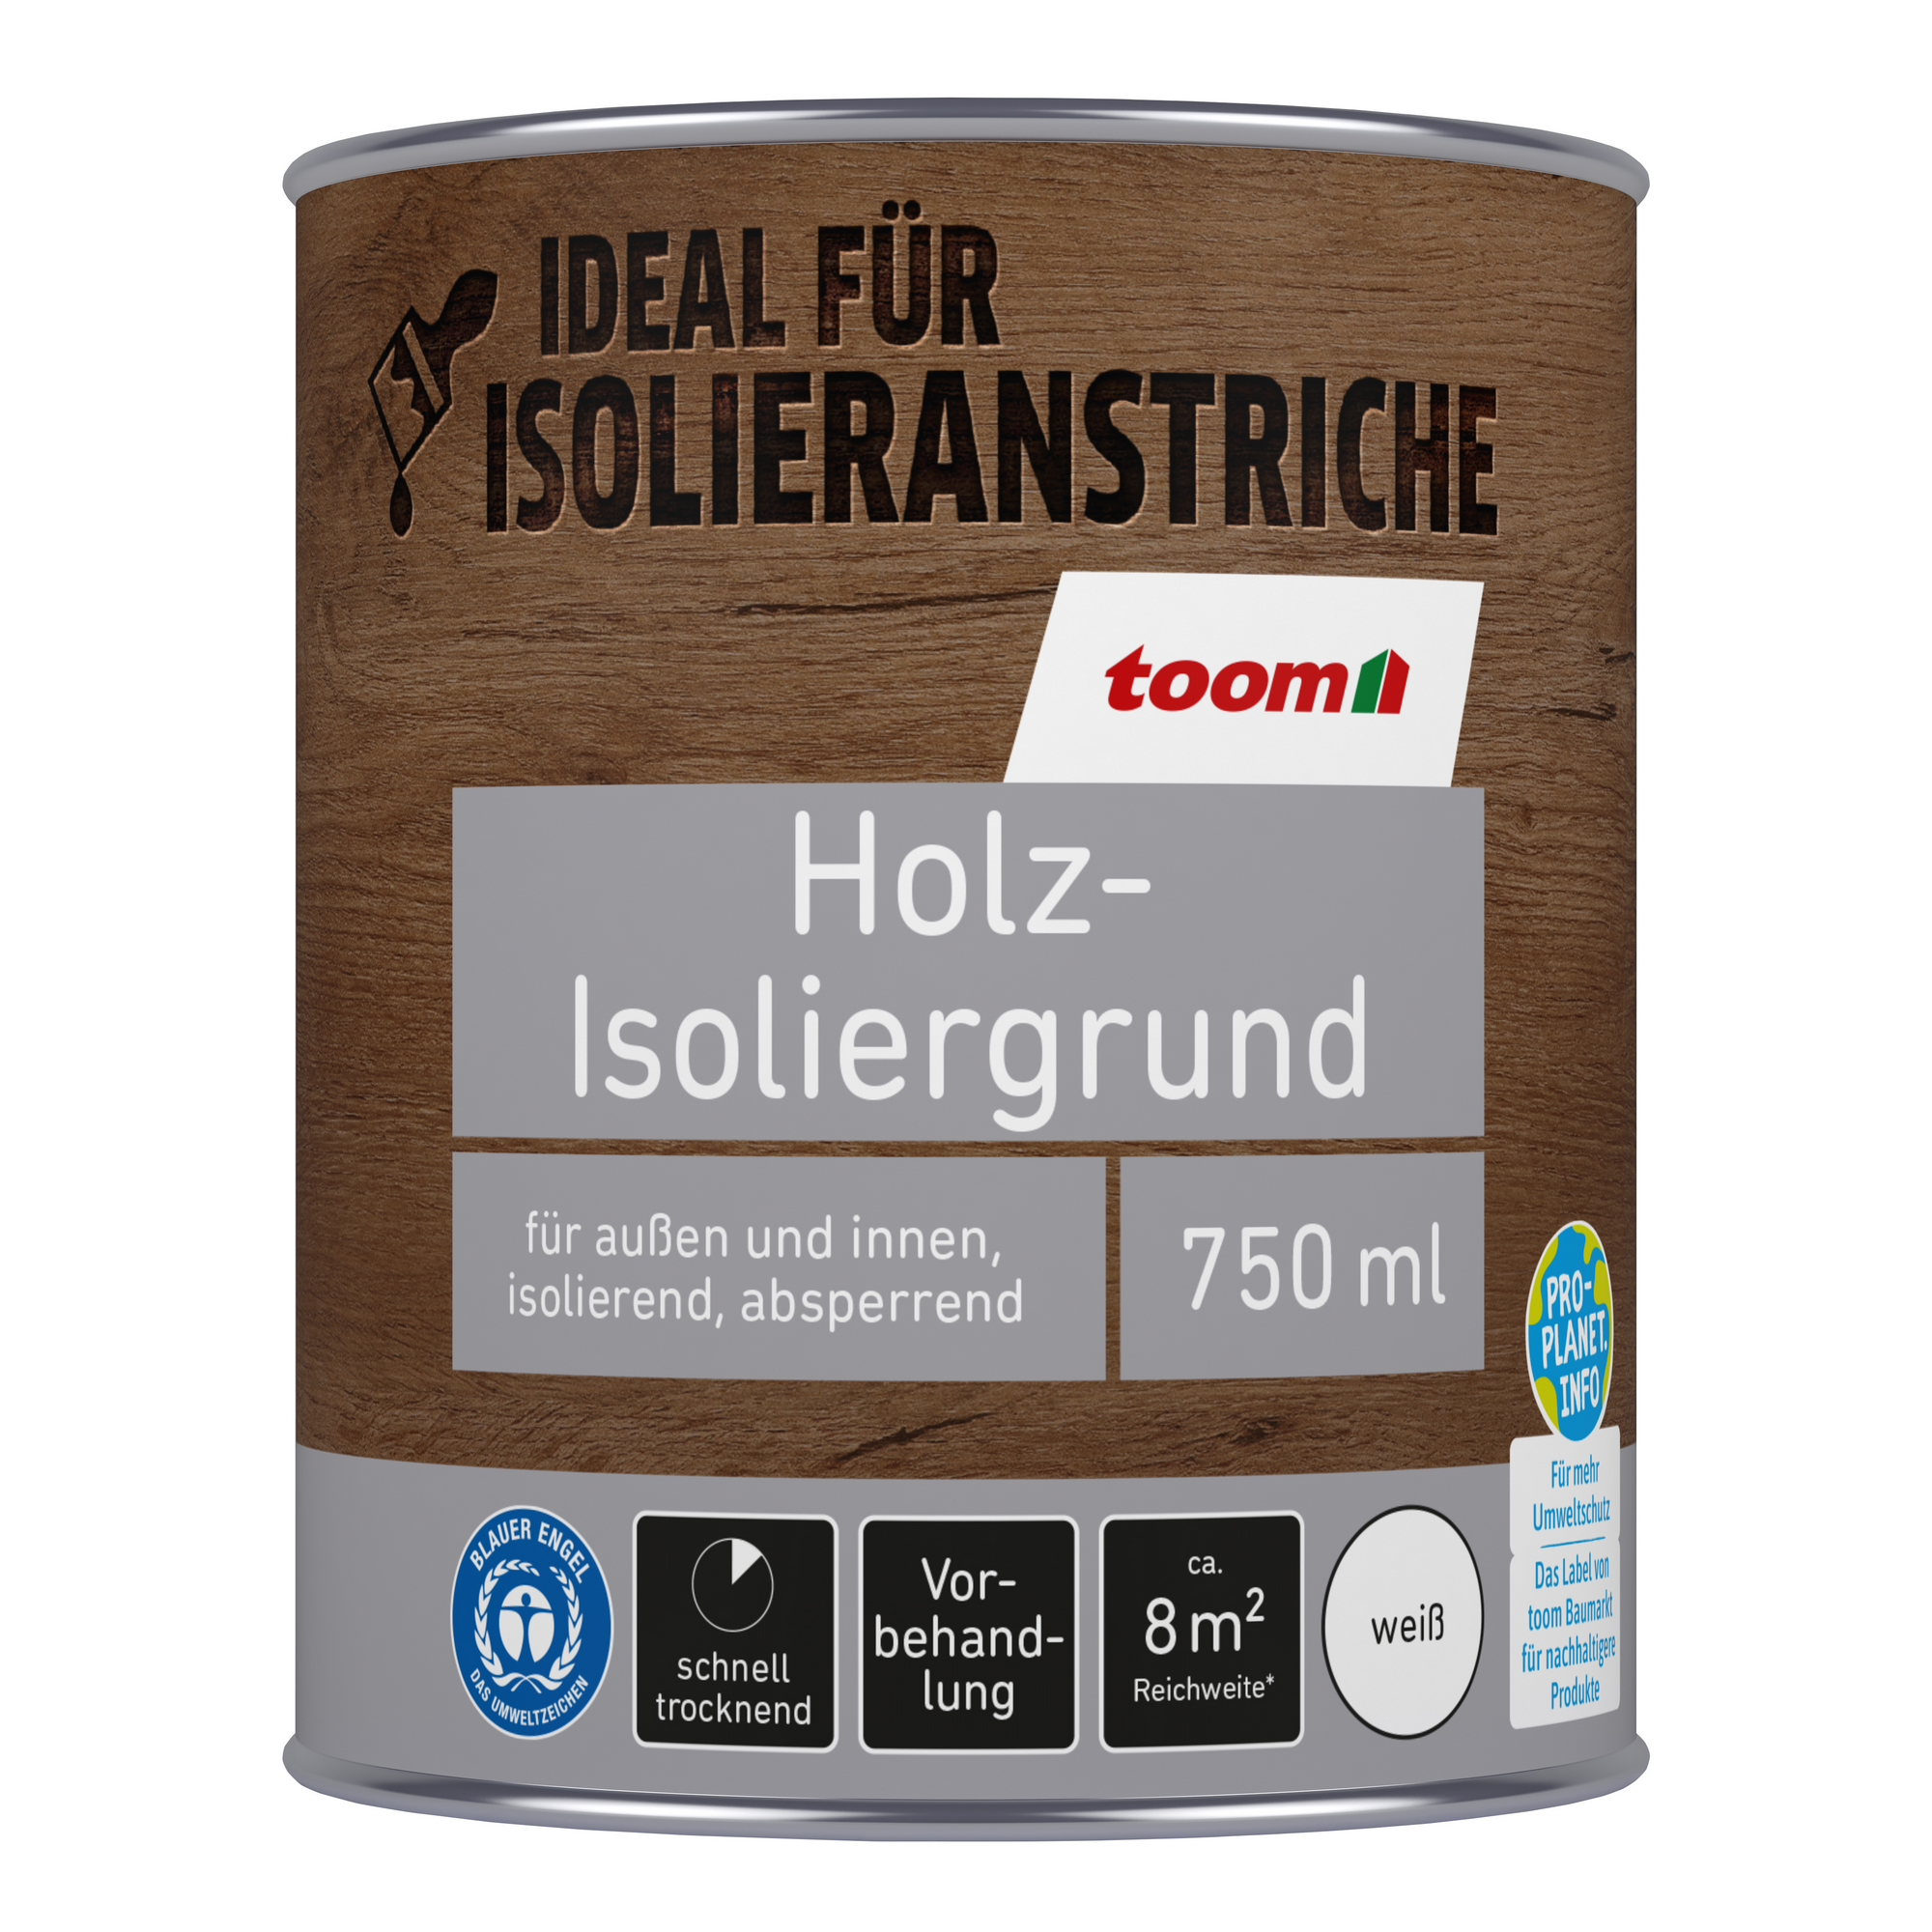 Holzisolierung weiß 750 ml + product video